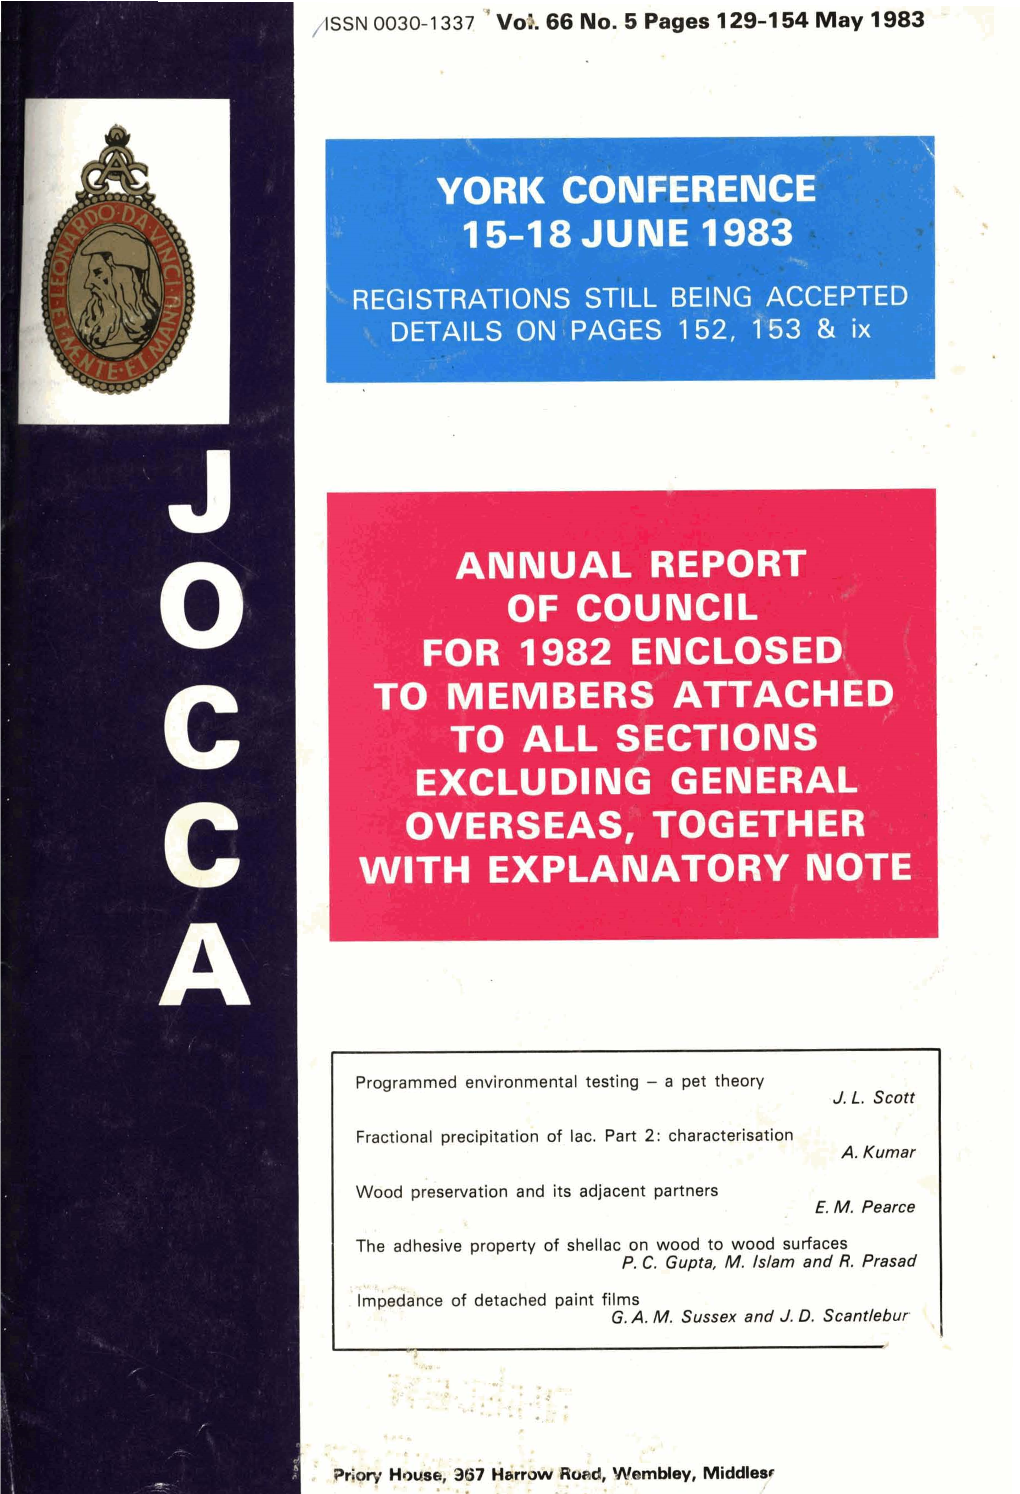 Journal of the Oil and Colour Chemists' Association 1983 Vol.66